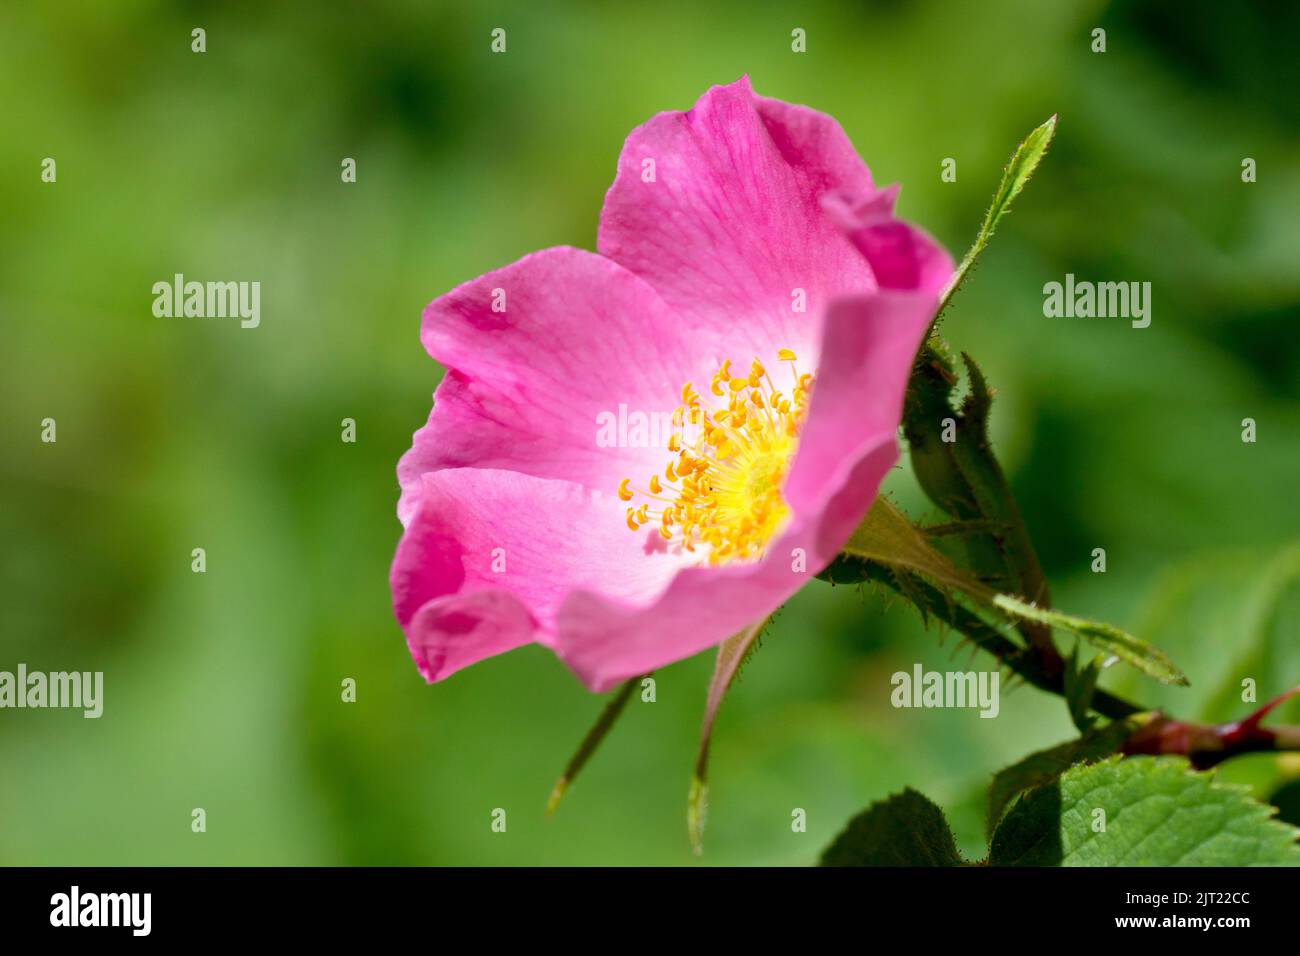 Wild Rose (rosa), probably one of the many varieties of Downy Rose (tomentosa, sherardii or mollis), close up of a single isolated flower. Stock Photo